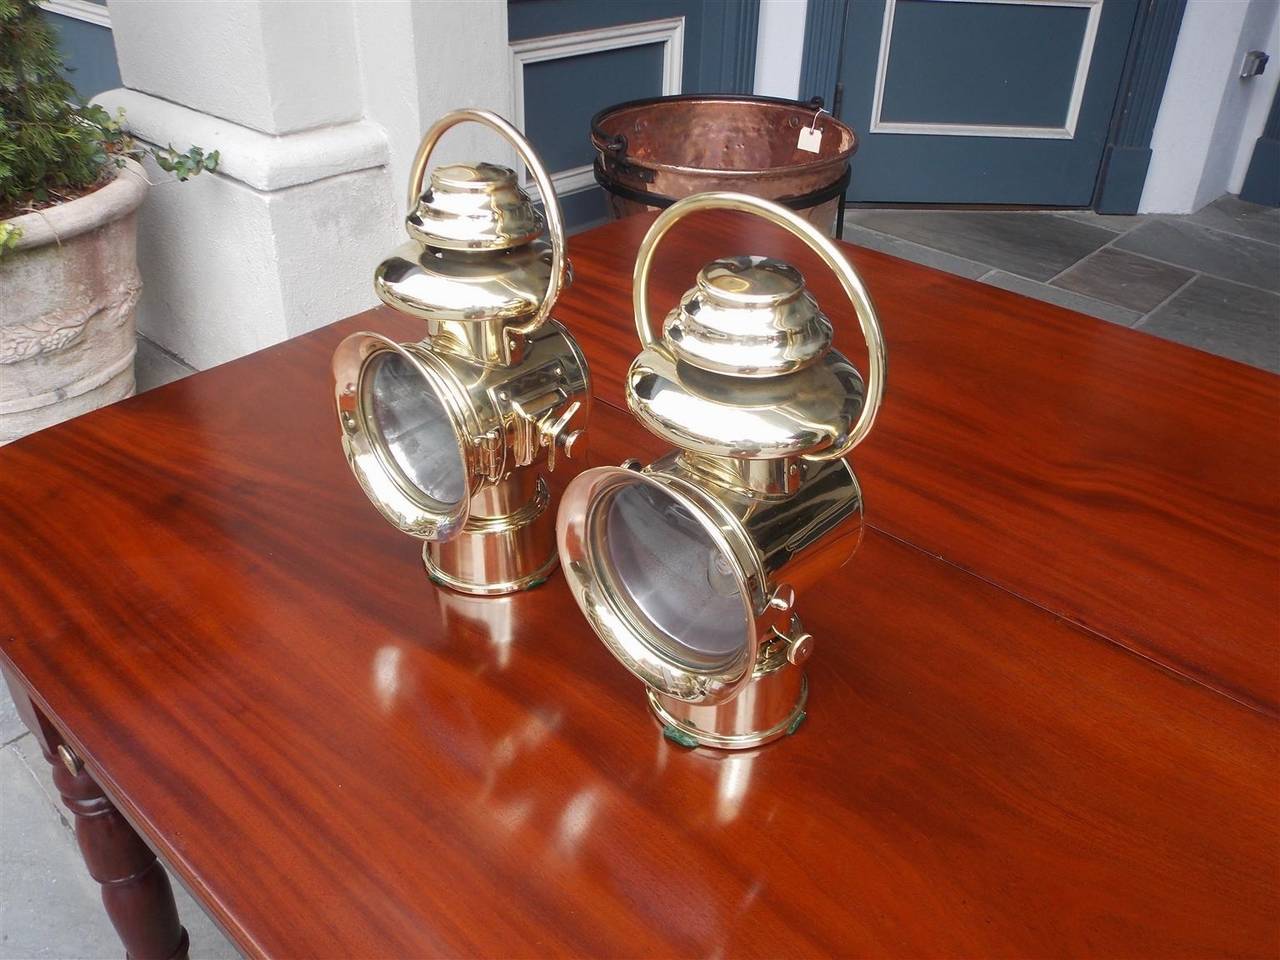 Pair of American brass carriage lanterns with dome globe, side mount, carrying handle, and original font. Pair can be electrified if desired, Early 20th Century.